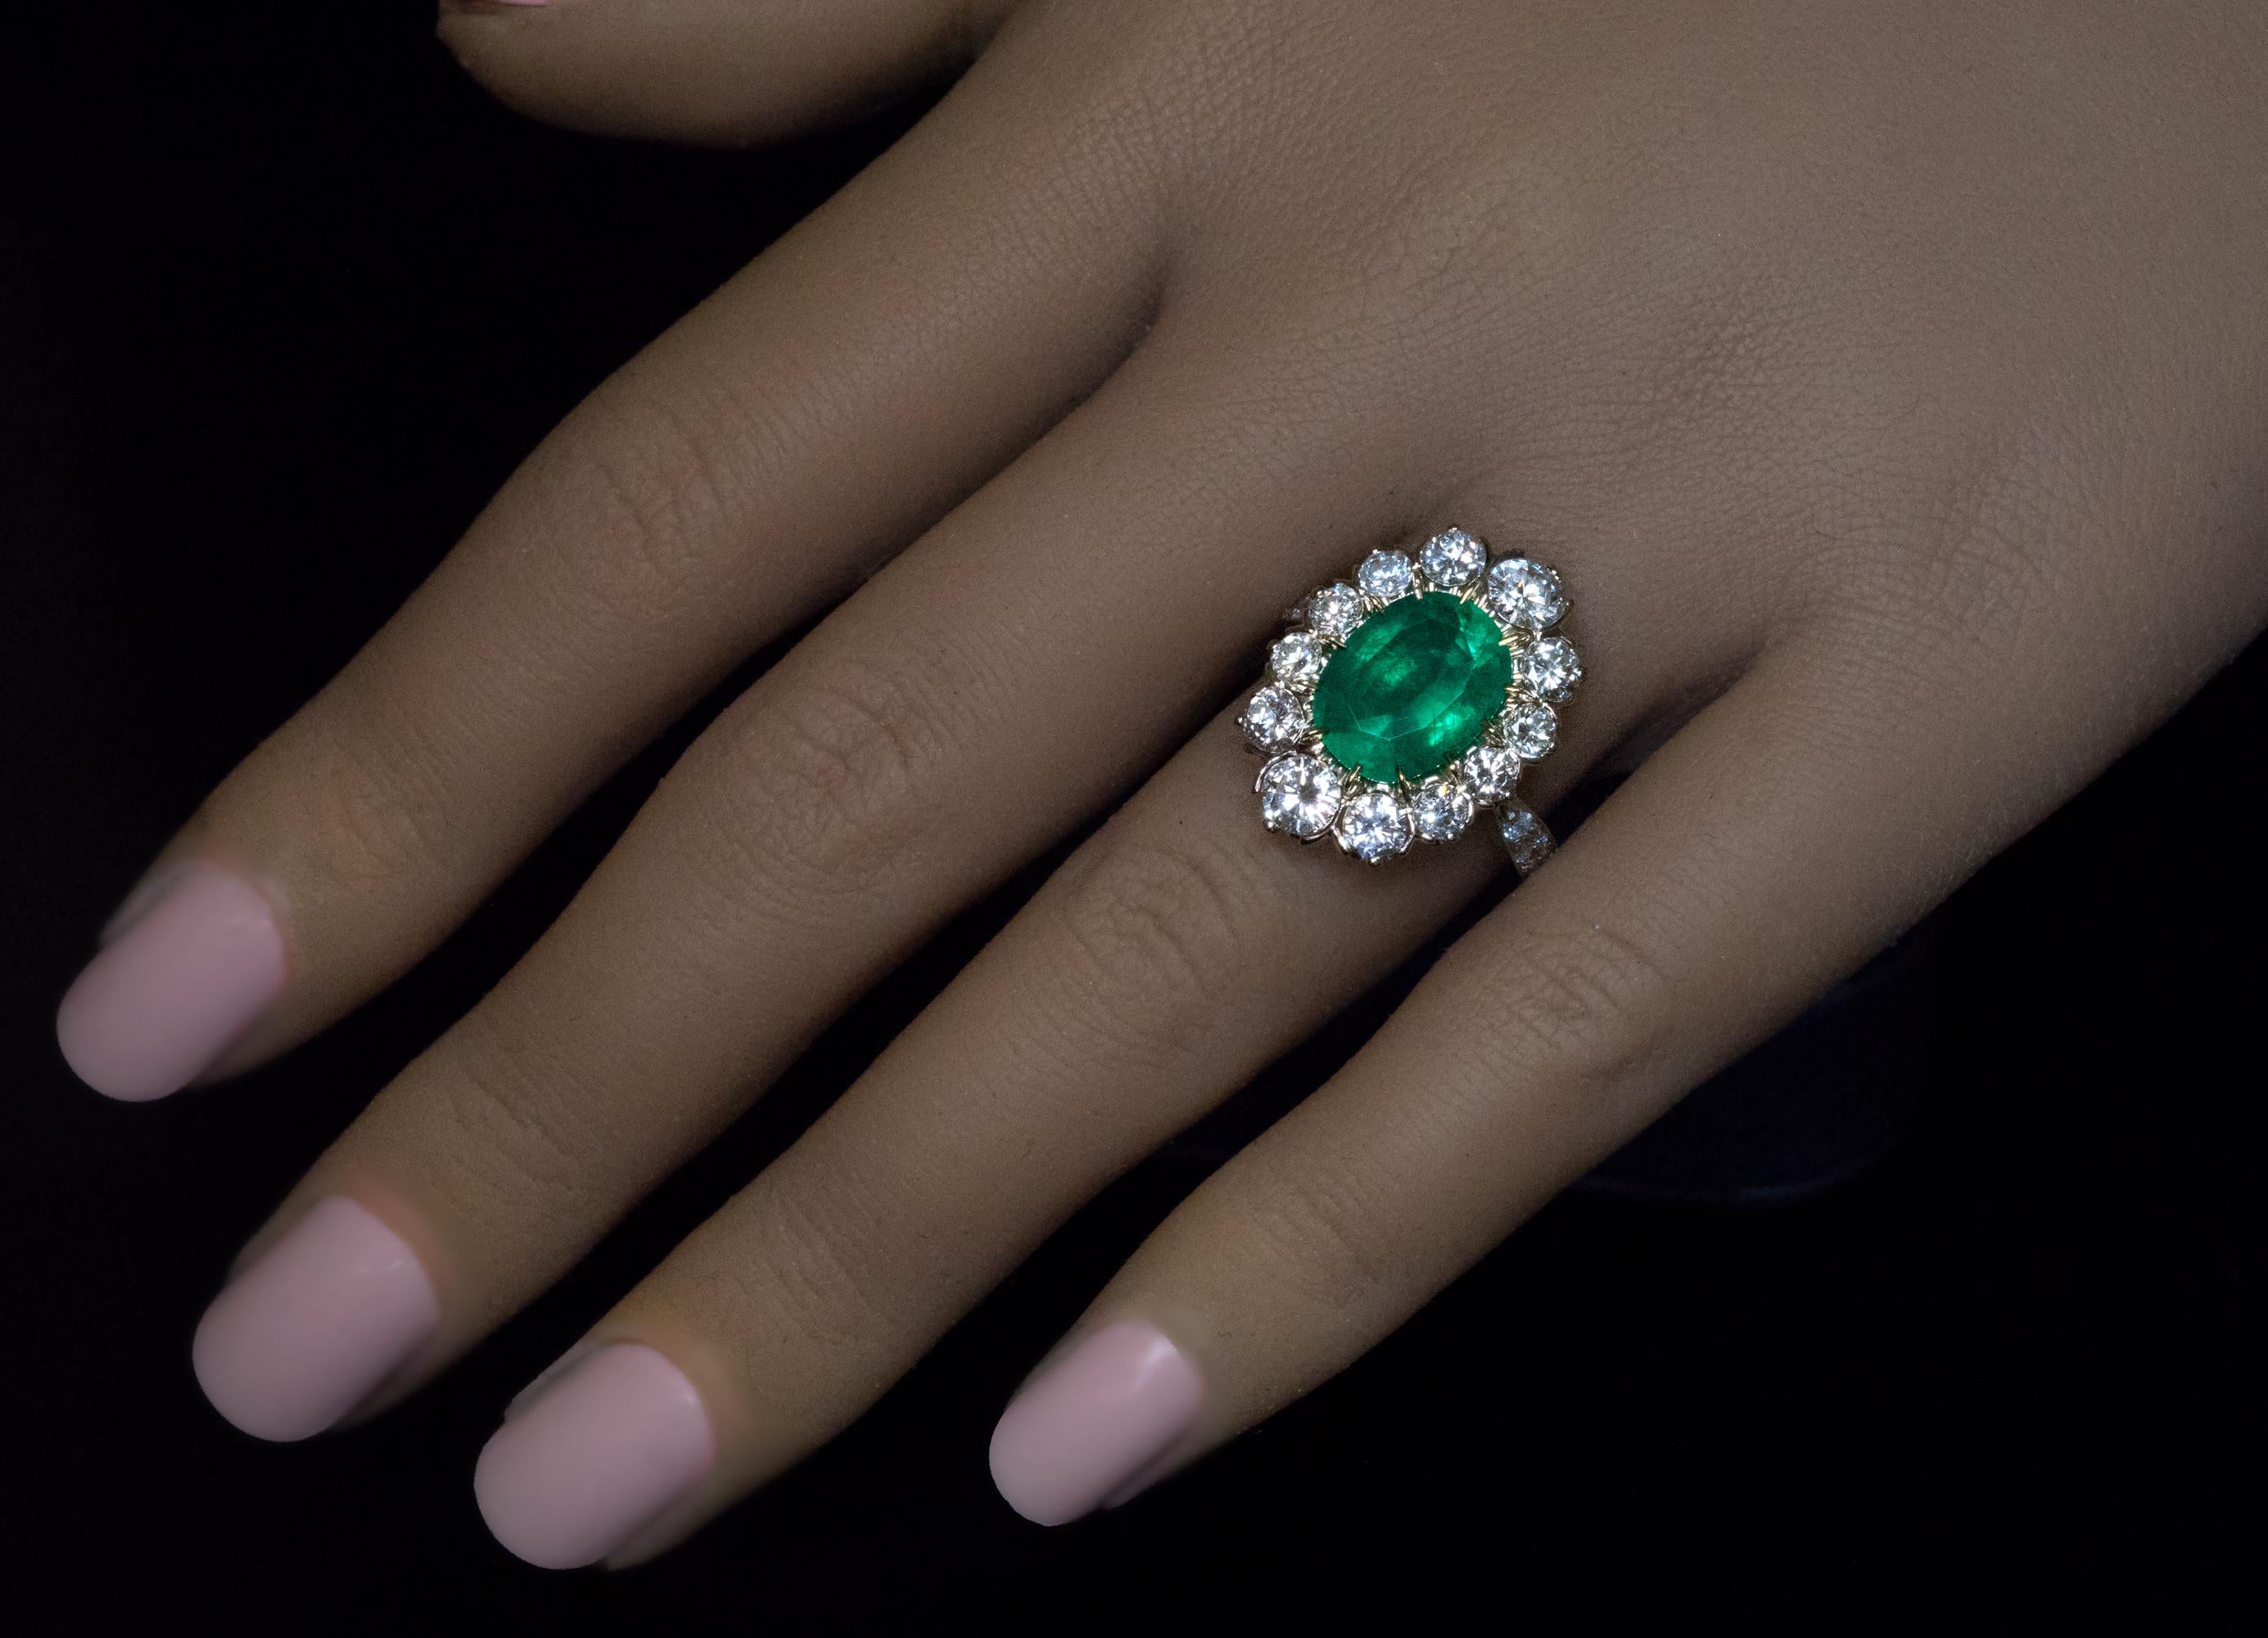 France, c. 1950s  This impressive cluster ring is finely crafted in 18K yellow and white gold. The ring is centered with an oval 3.64 ct emerald of a vivid bluish green color. The emerald is surrounded by bright white brilliant cut diamonds (F-G